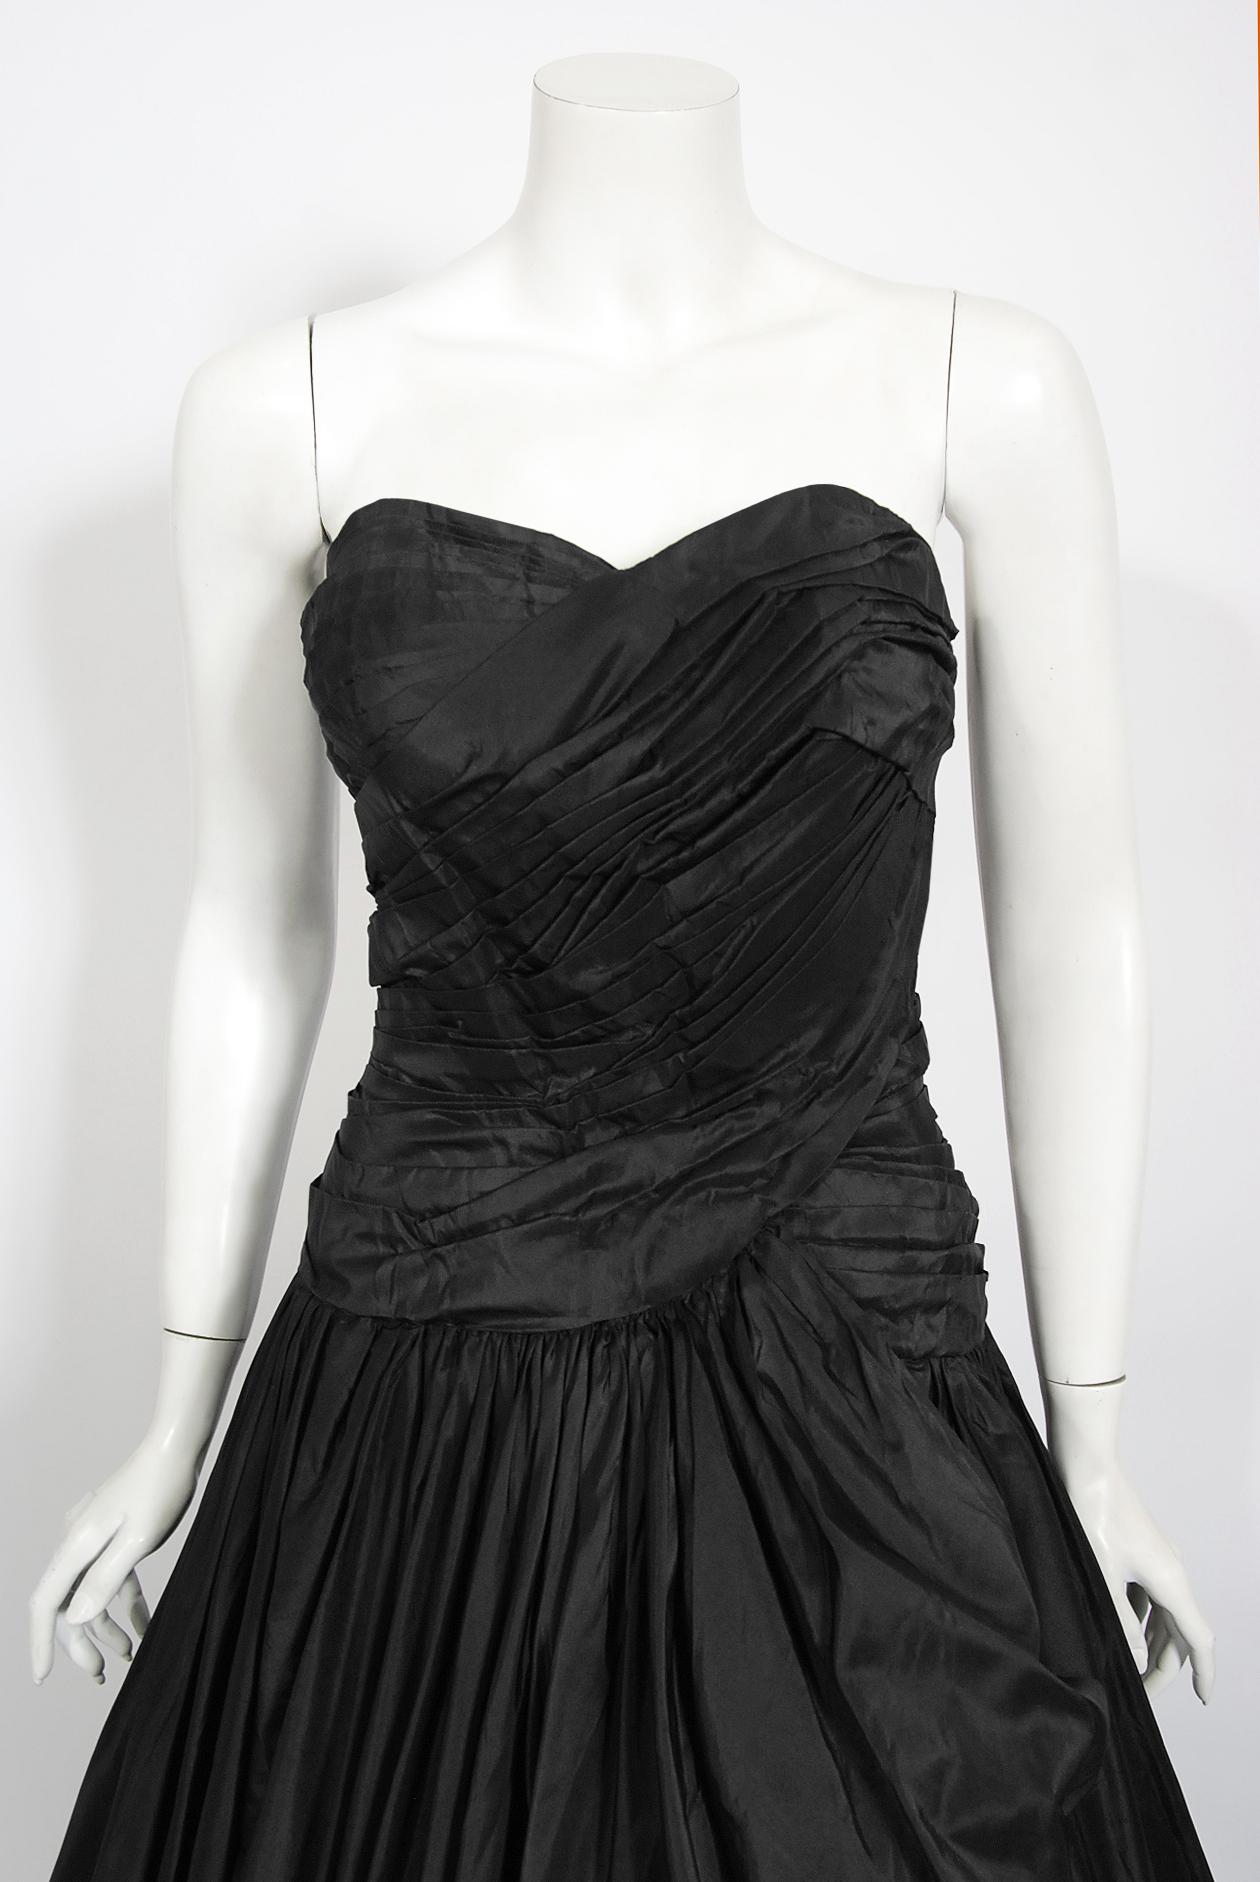 In this sensational Nanty Couture black silk taffeta sculpted voluminous ballgown, the detailed construction and meticulous attention to detail are comparable to what you will find in modern day haute couture. This custom garment even still has her